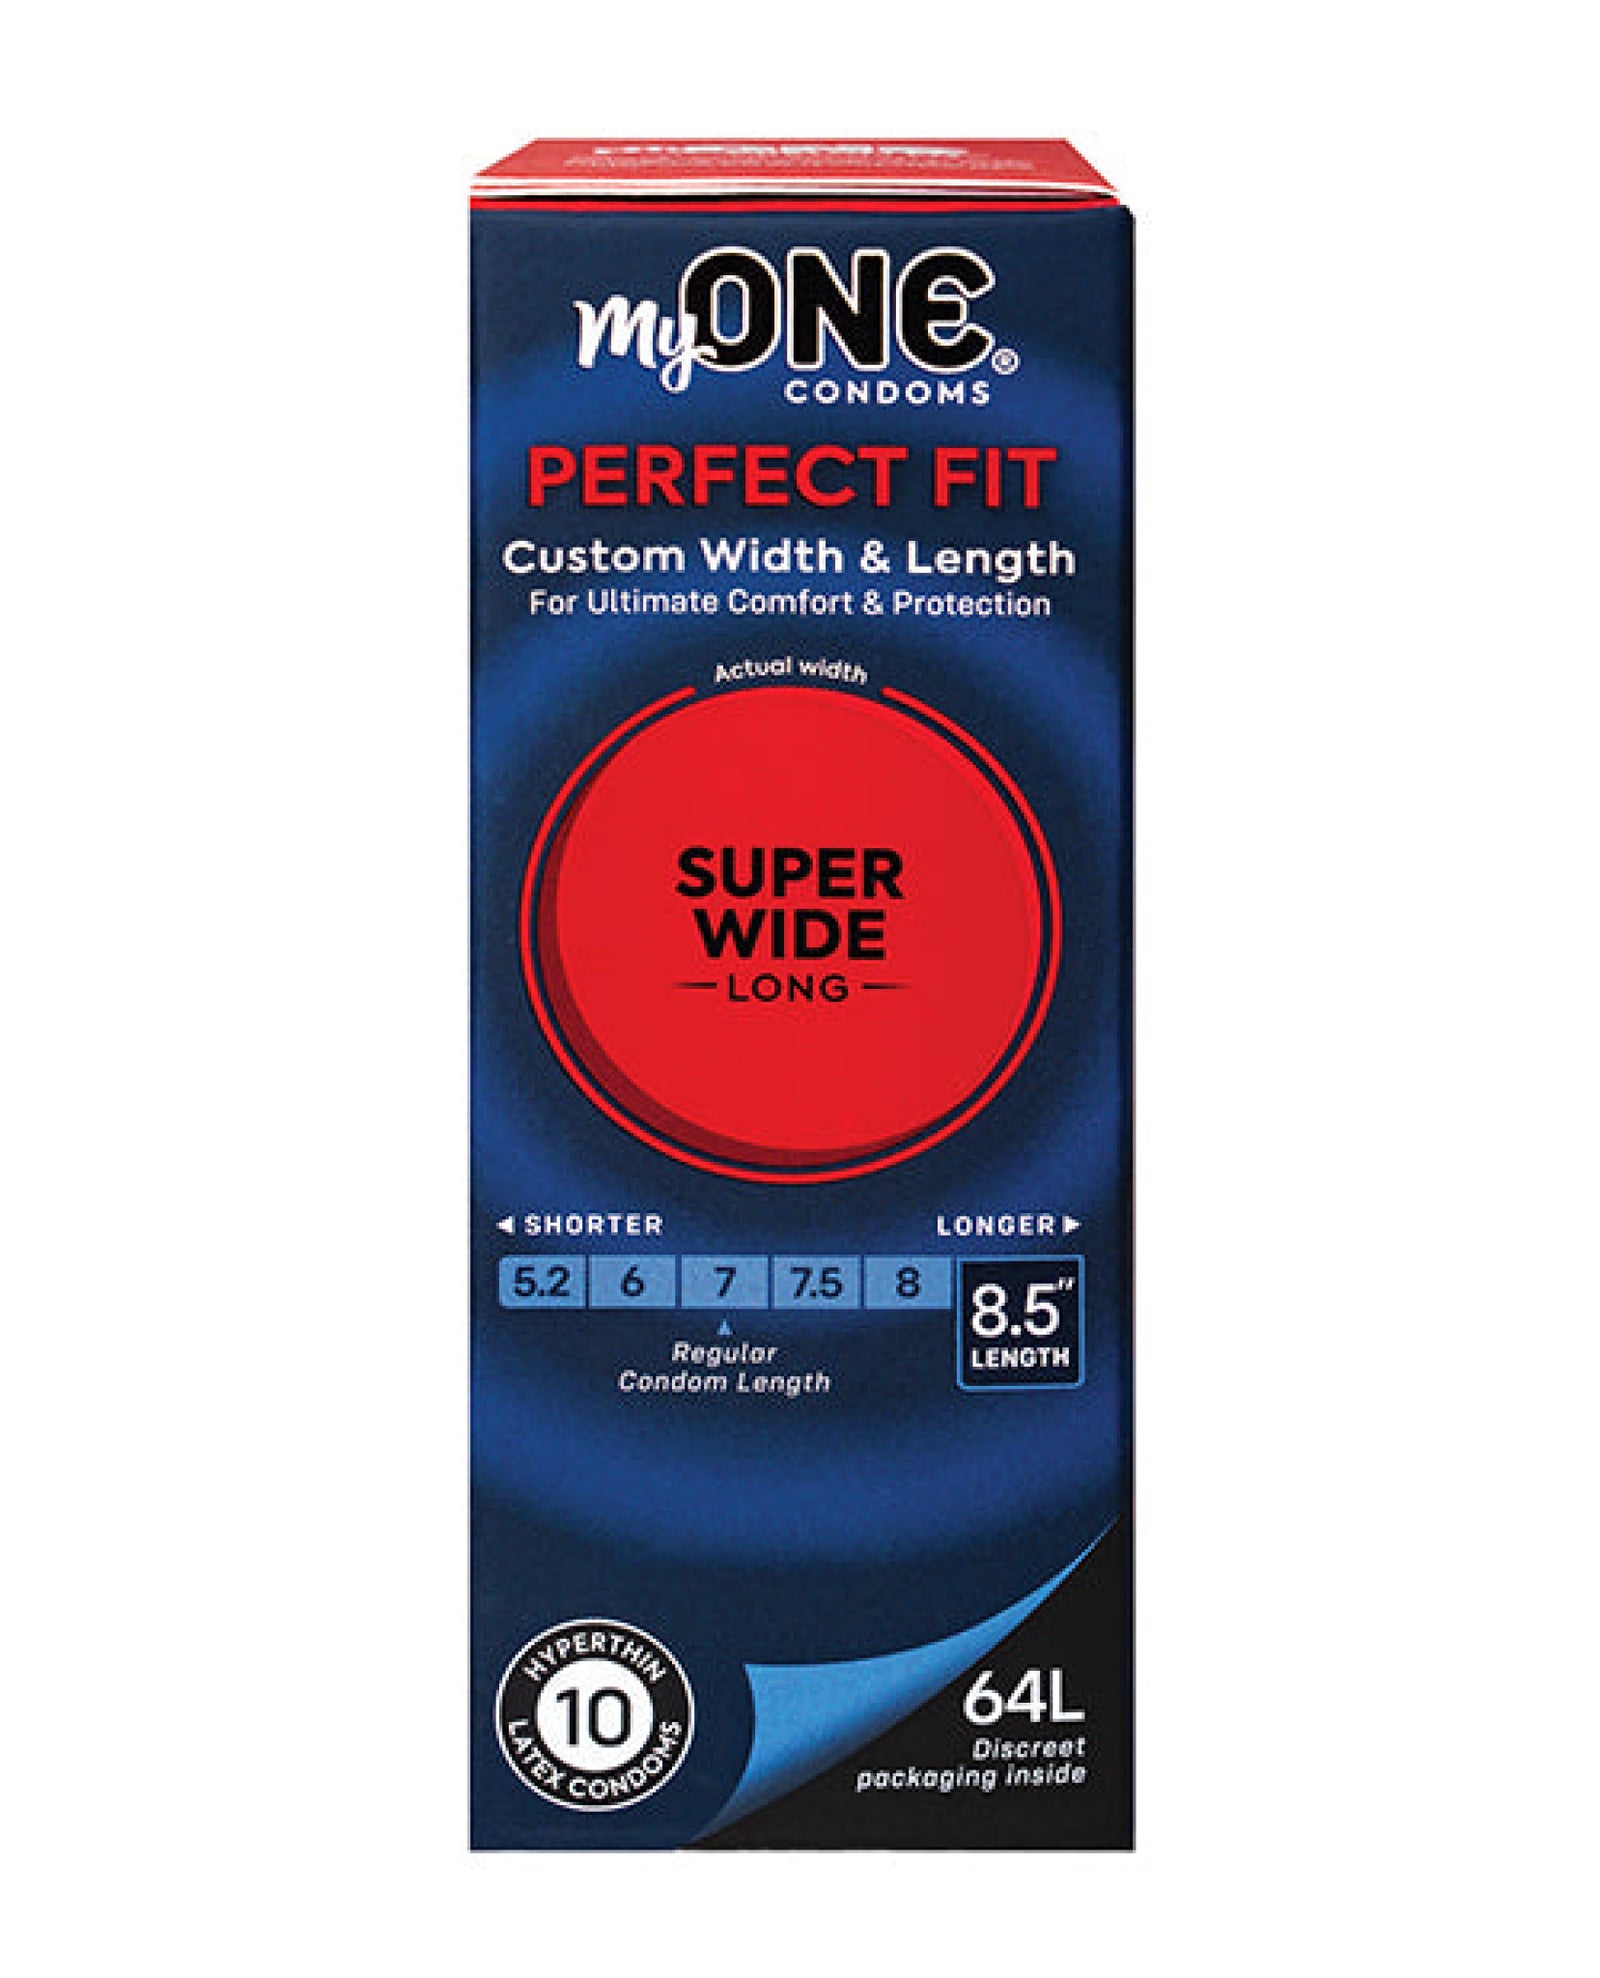 My One Super Wide & Long Condoms - Pack of 10 Paradise Marketing